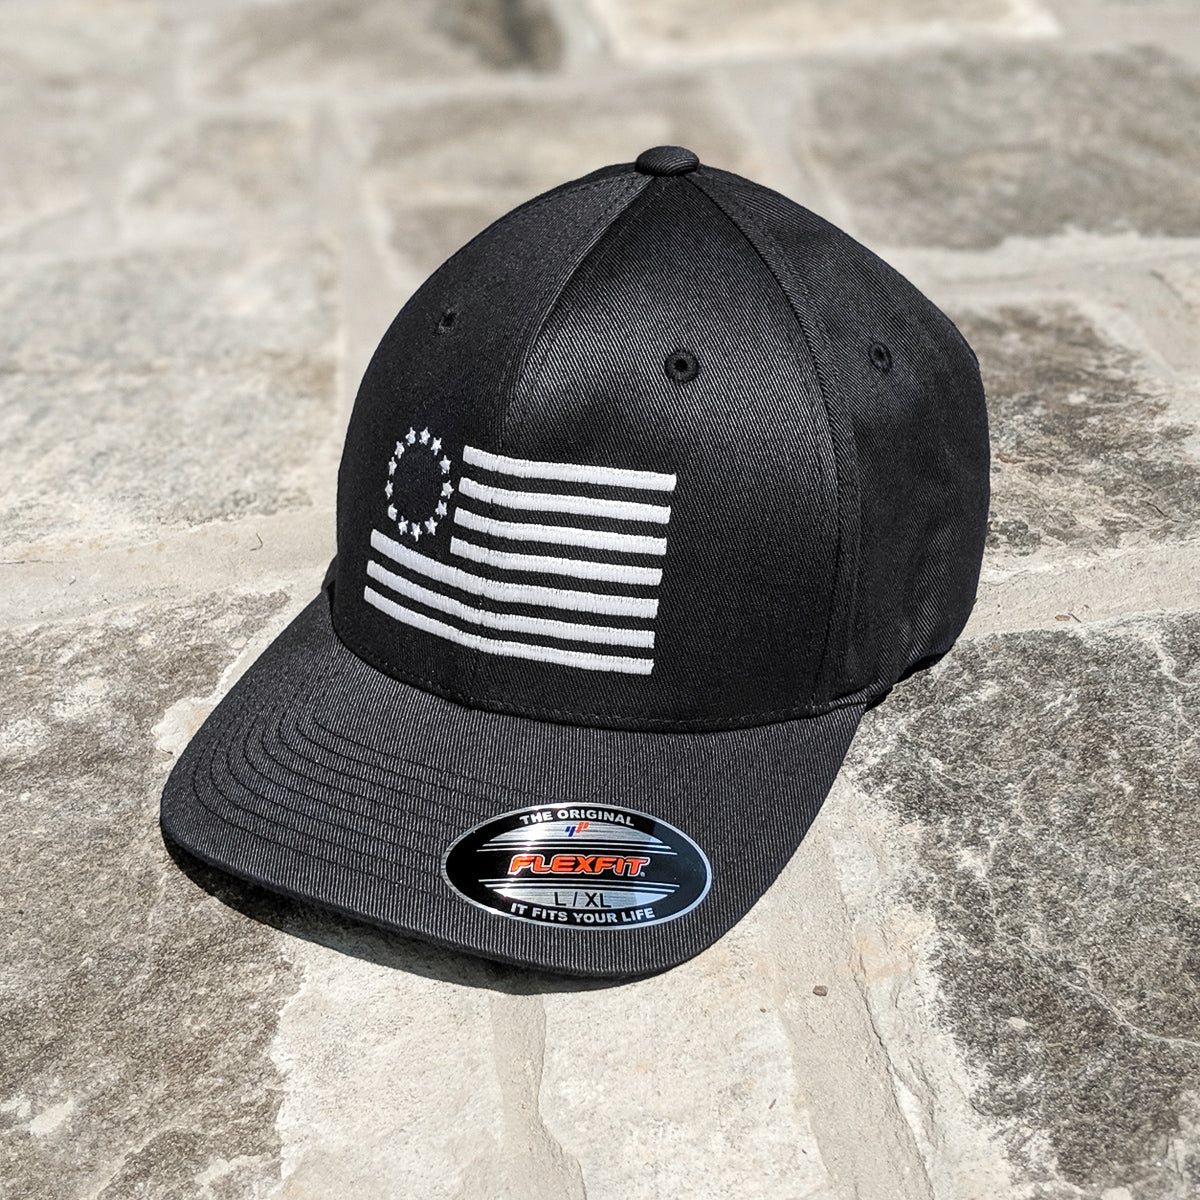 Betsy Ross Flag Flexfit features the Betsy Ross Flag embroidered on a black flexfit hat.